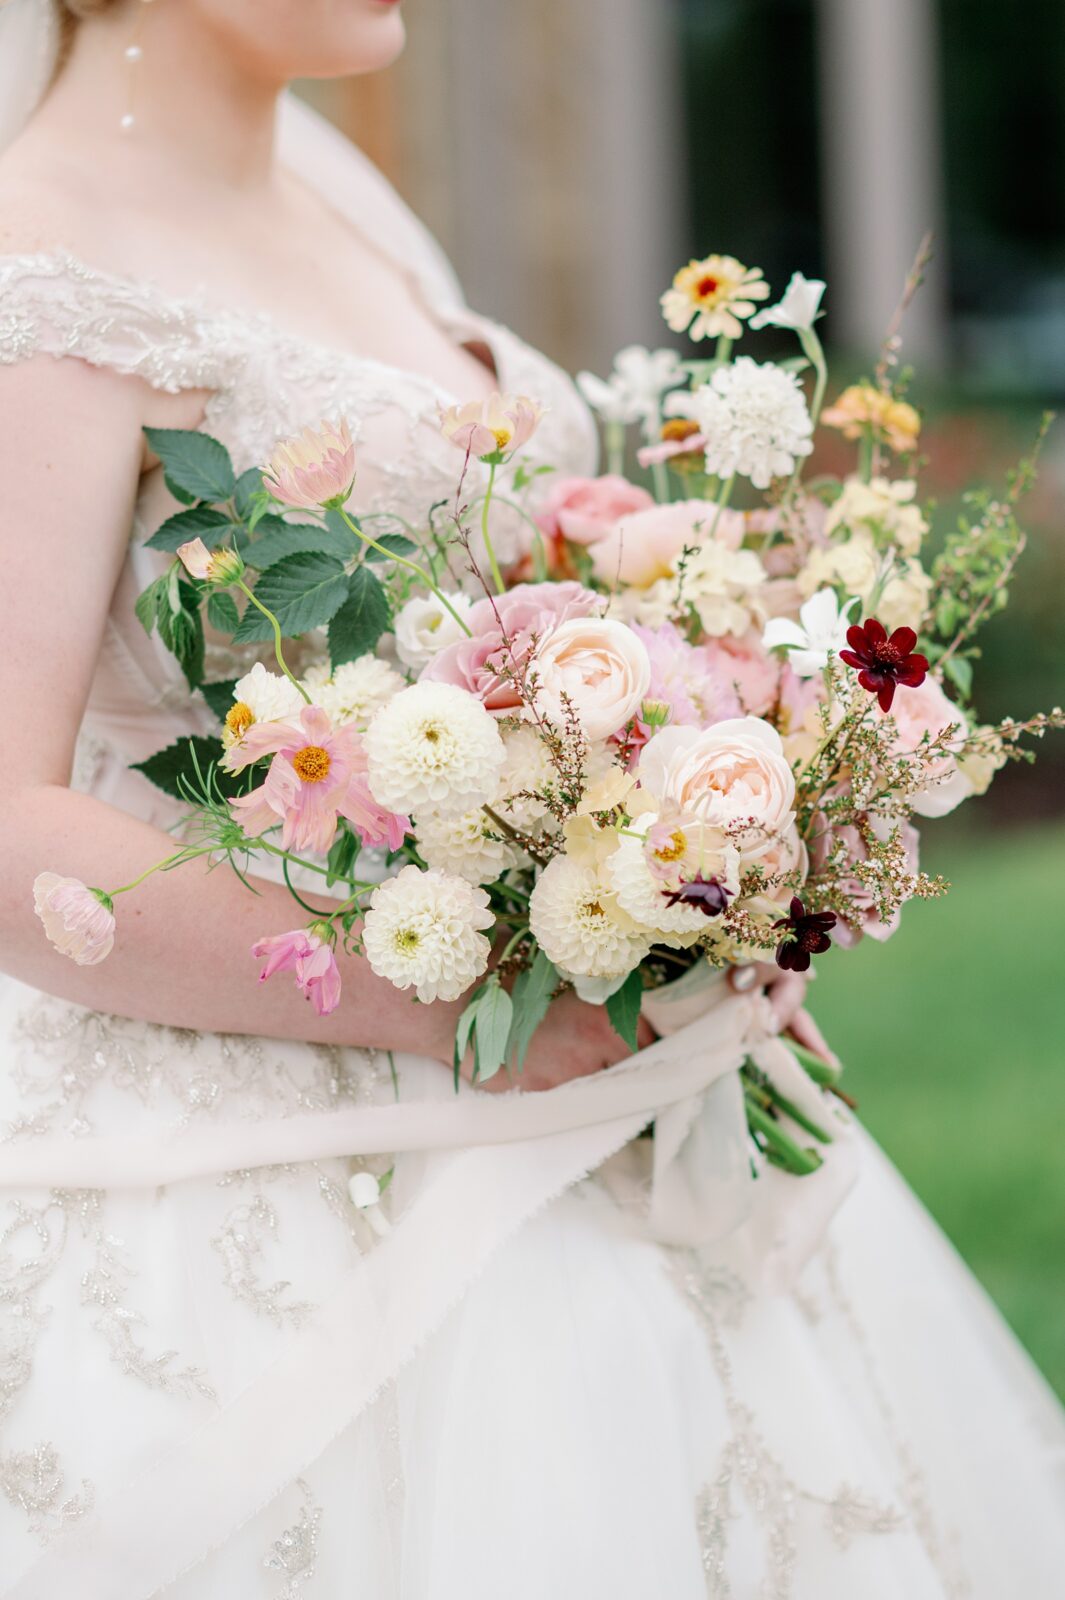 Whimsical and colorful floral bridal bouquet.